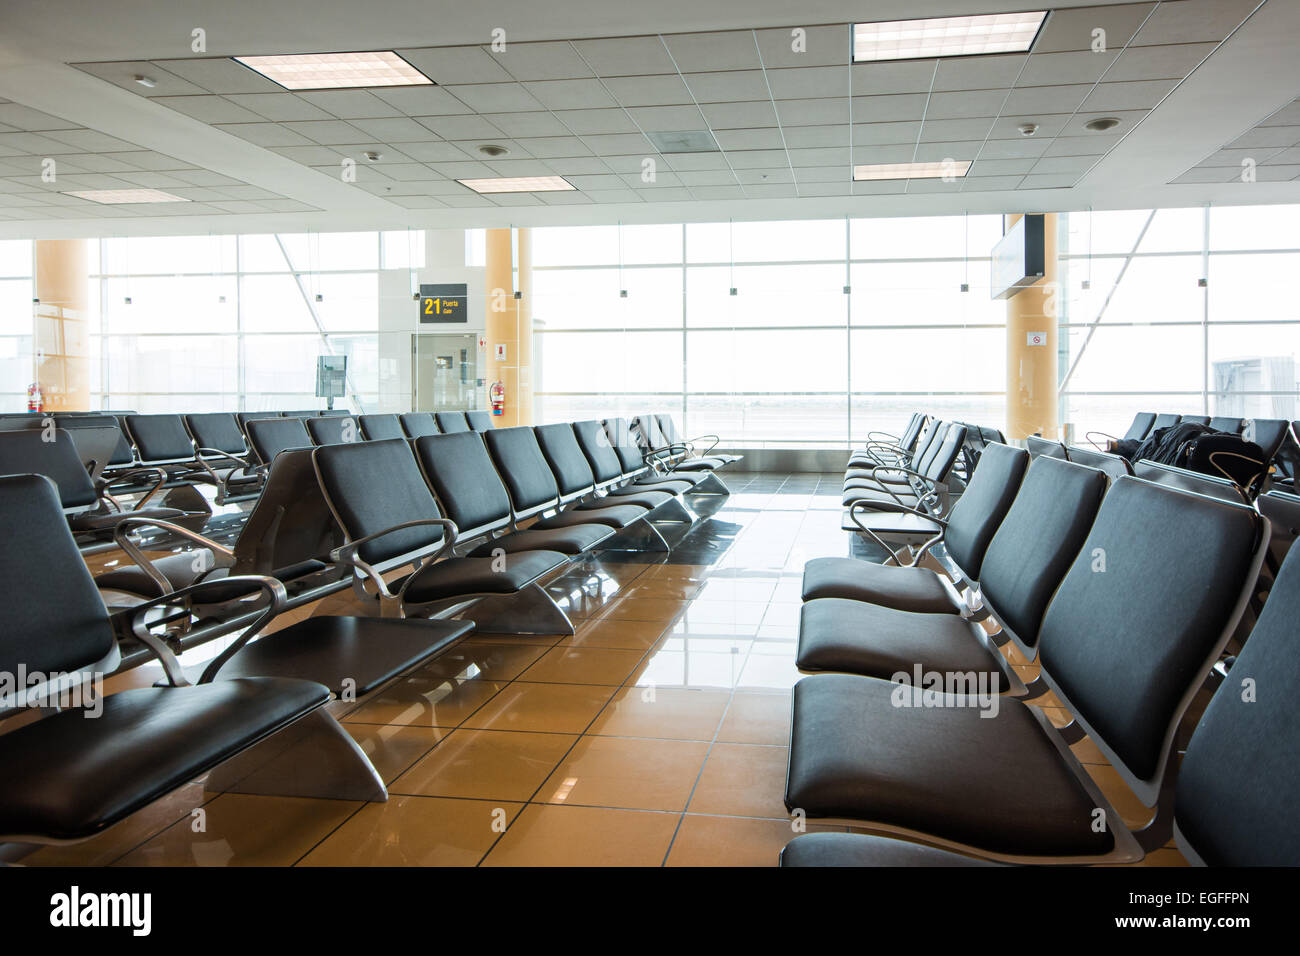 Airport Departure Gate Waiting Area with Seats Stock Photo